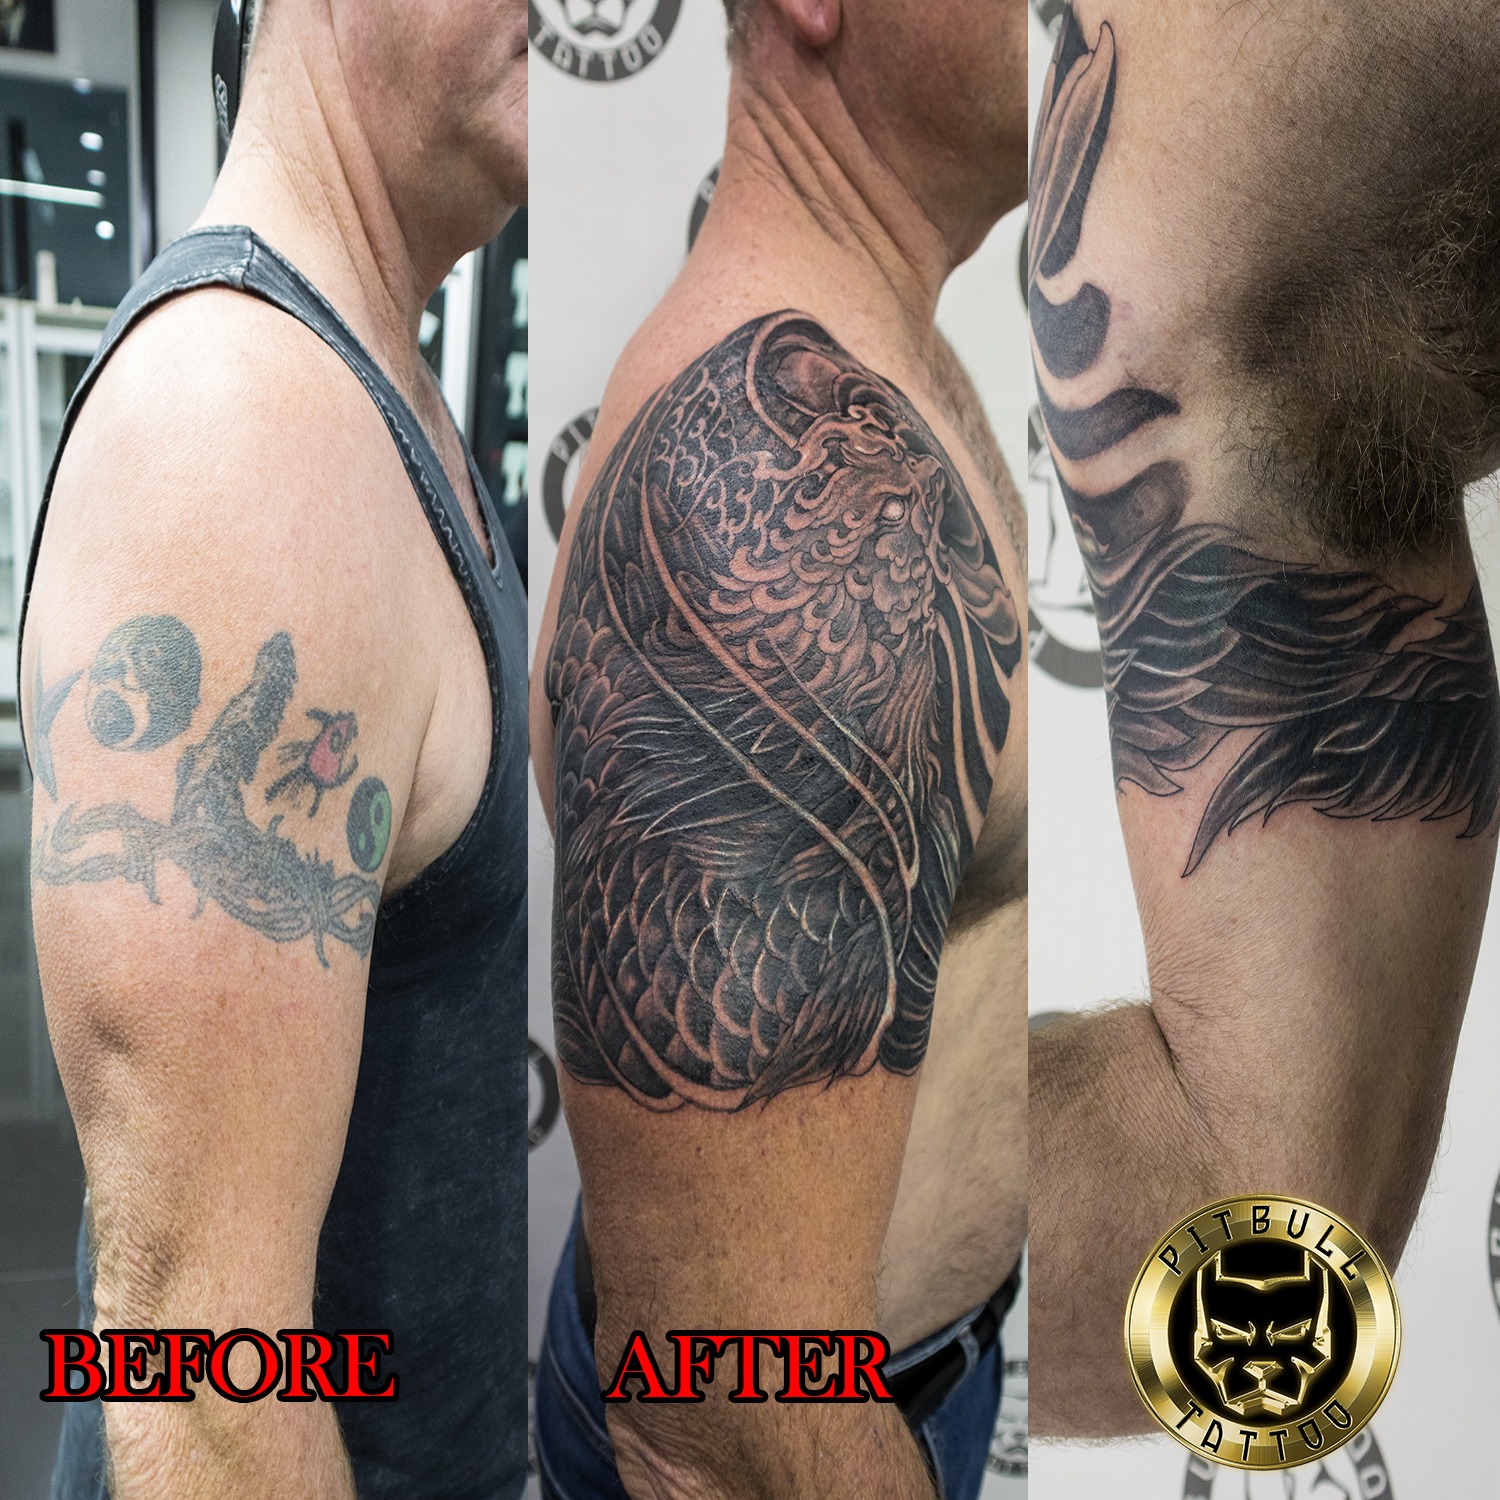 Tattoo Artist Transforms Unwanted Tattoo Into an Incredible Military  Memorial Piece